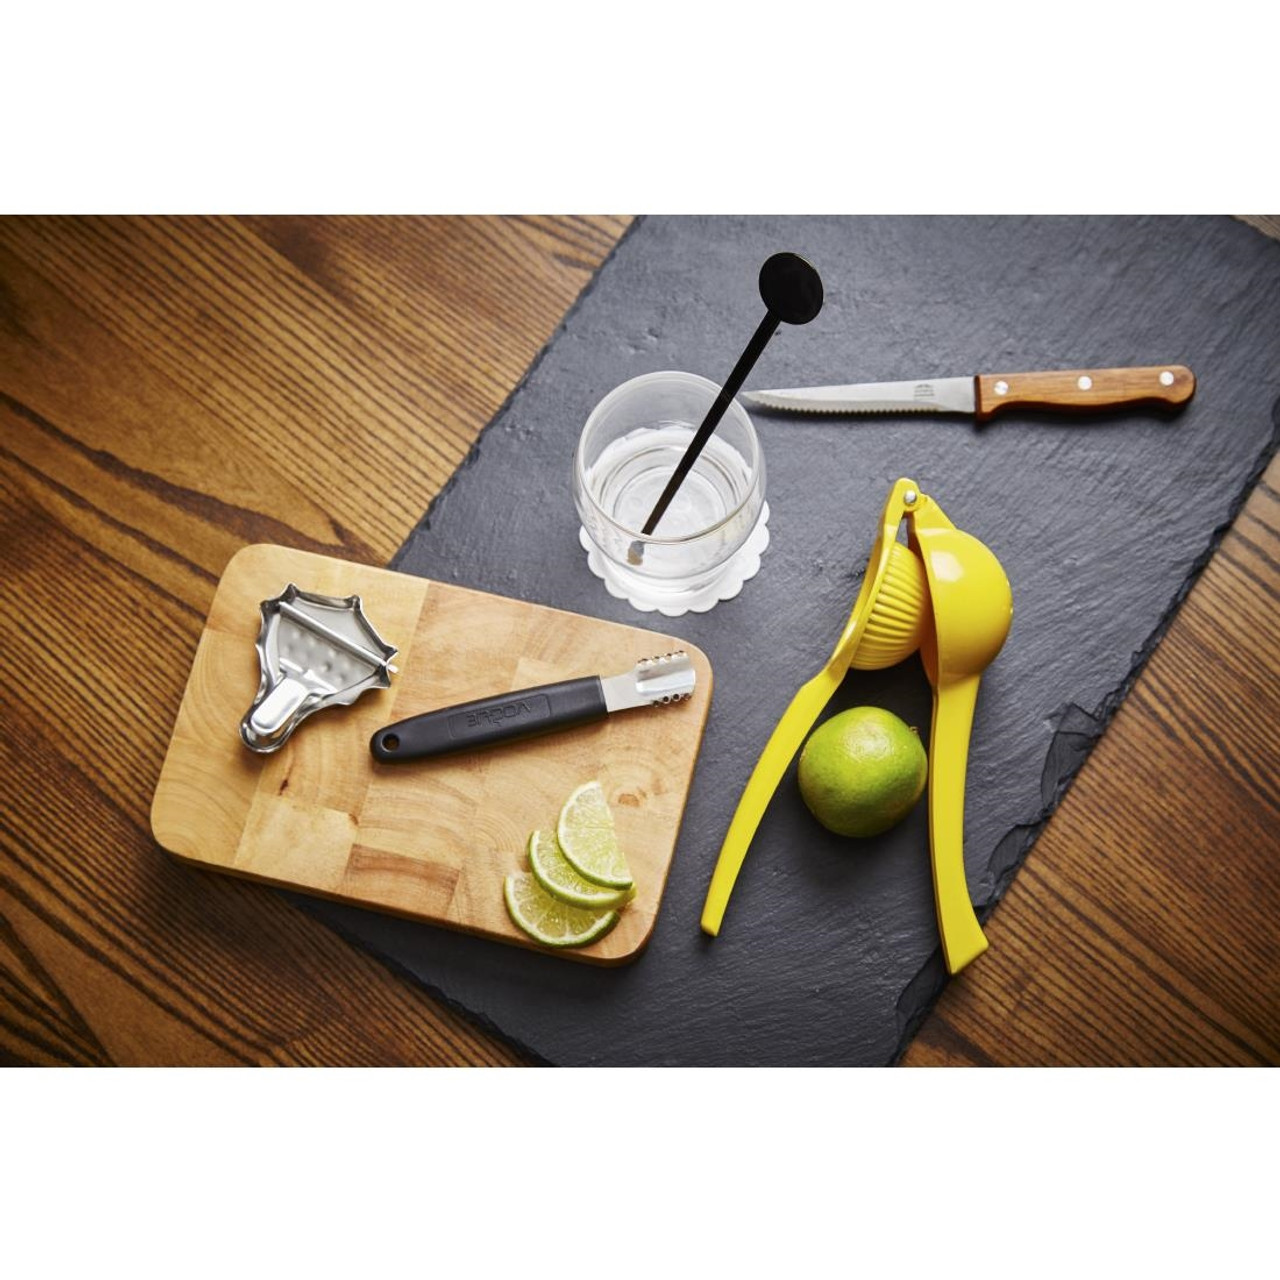 Vogue Small Rectangular Wooden Chopping Board - C461 - Buy Online at Nisbets